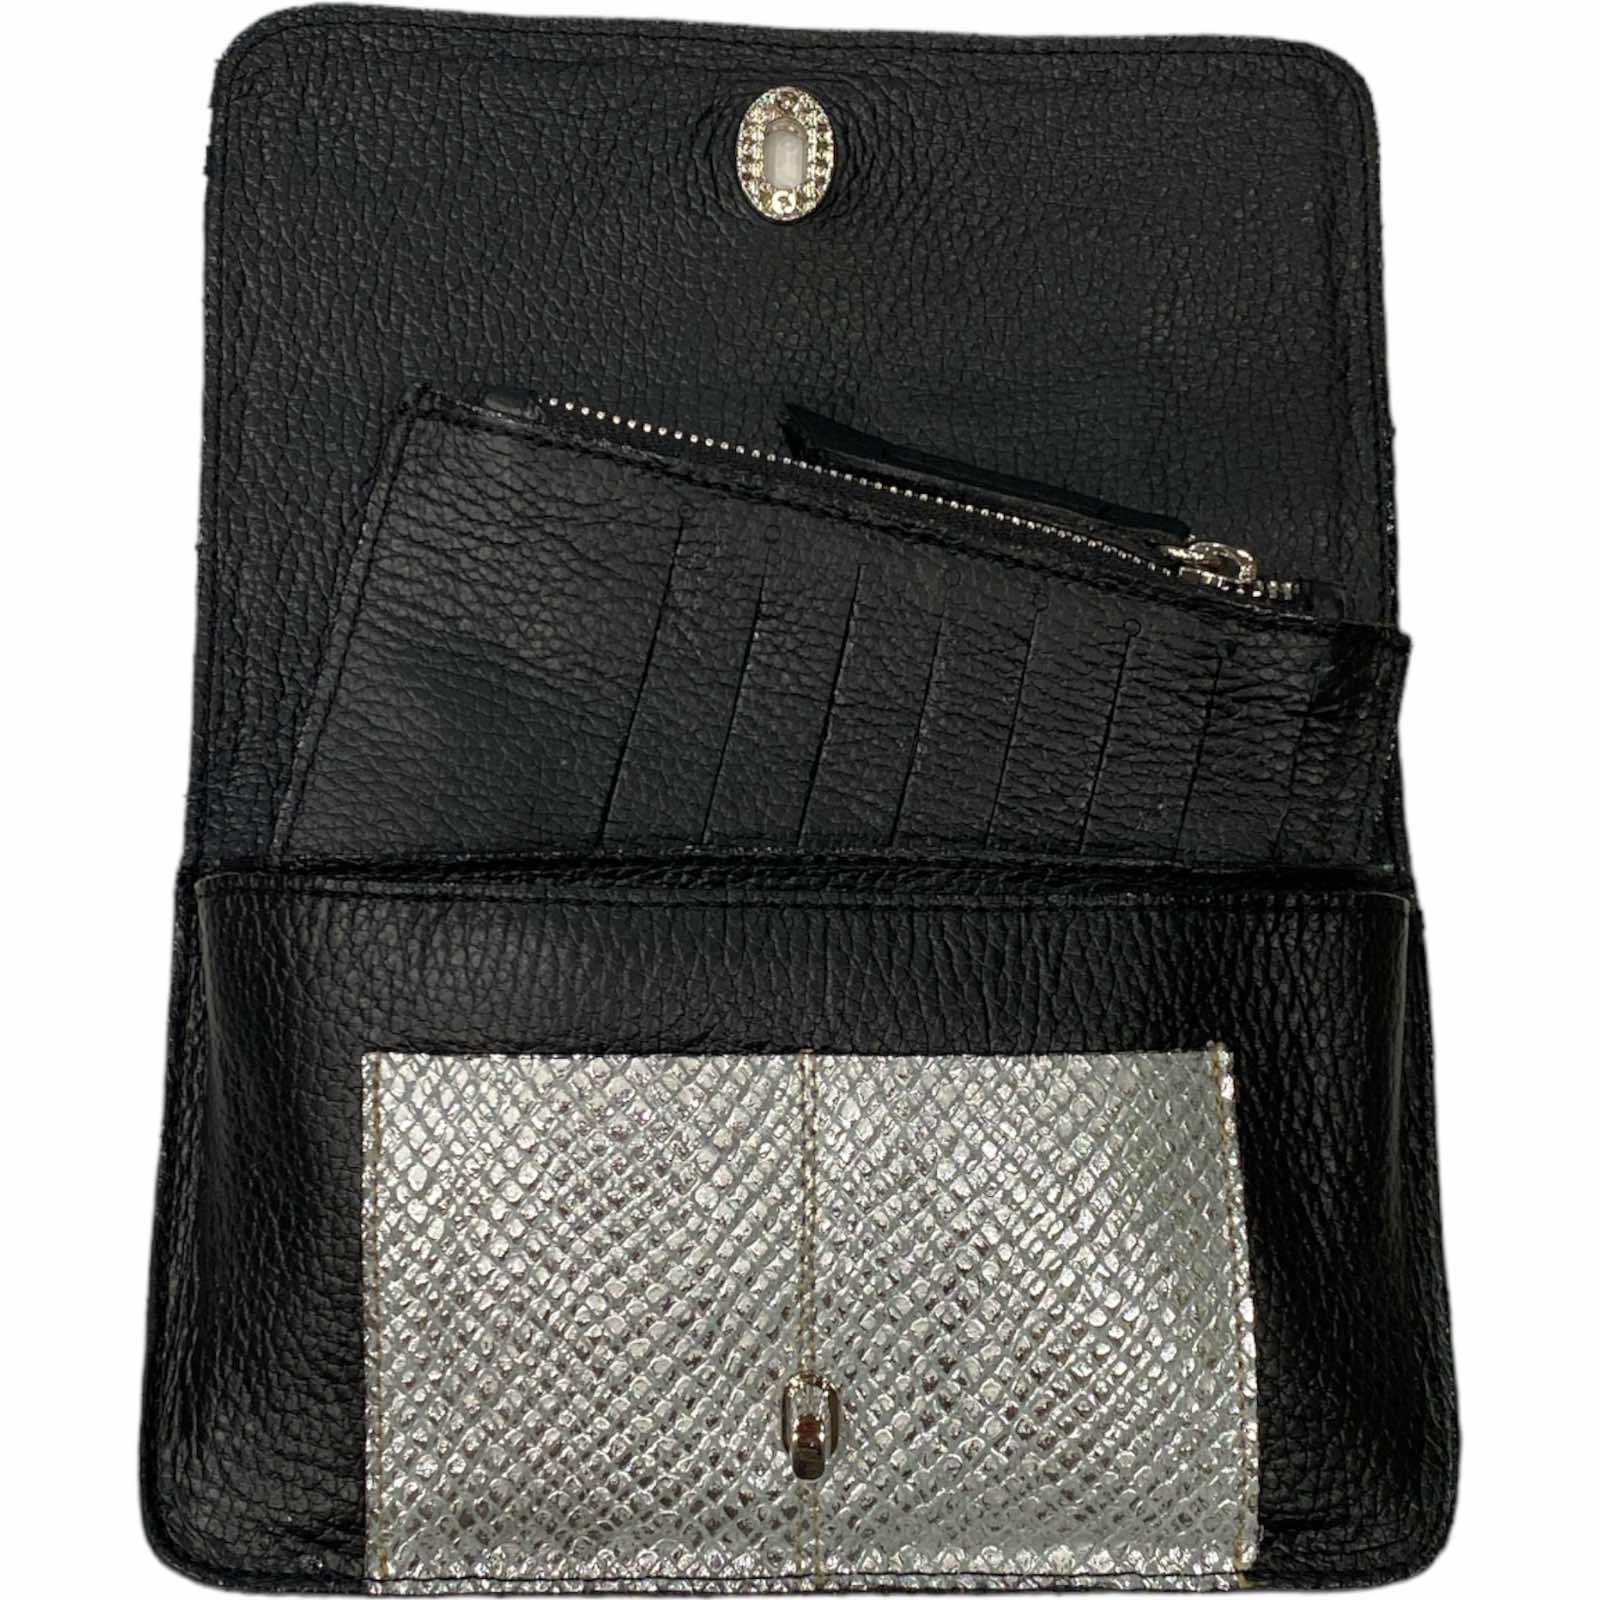 Black and silver vintage calf-hair leather multi wallet bag